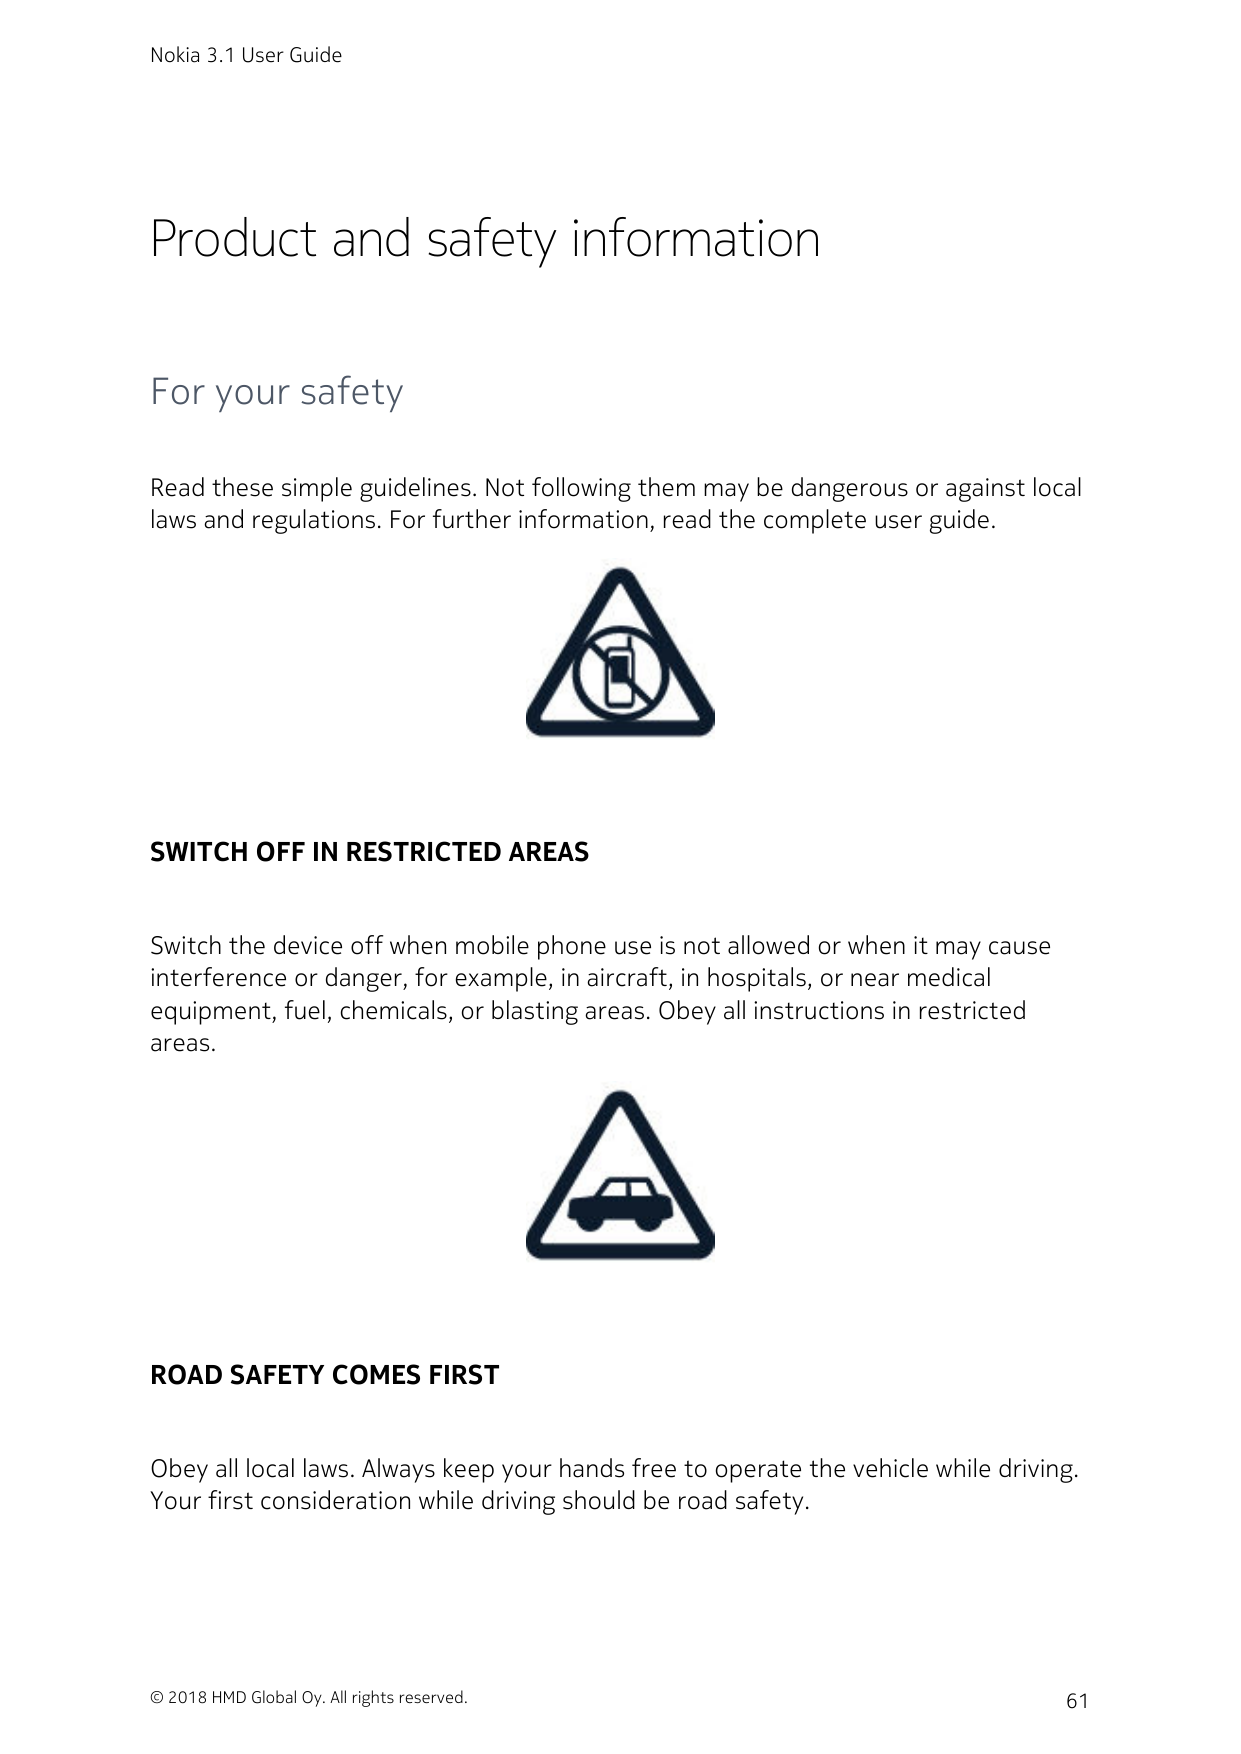 Nokia 3.1 User GuideProduct and safety informationFor your safetyRead these simple guidelines. Not following them may be dangero